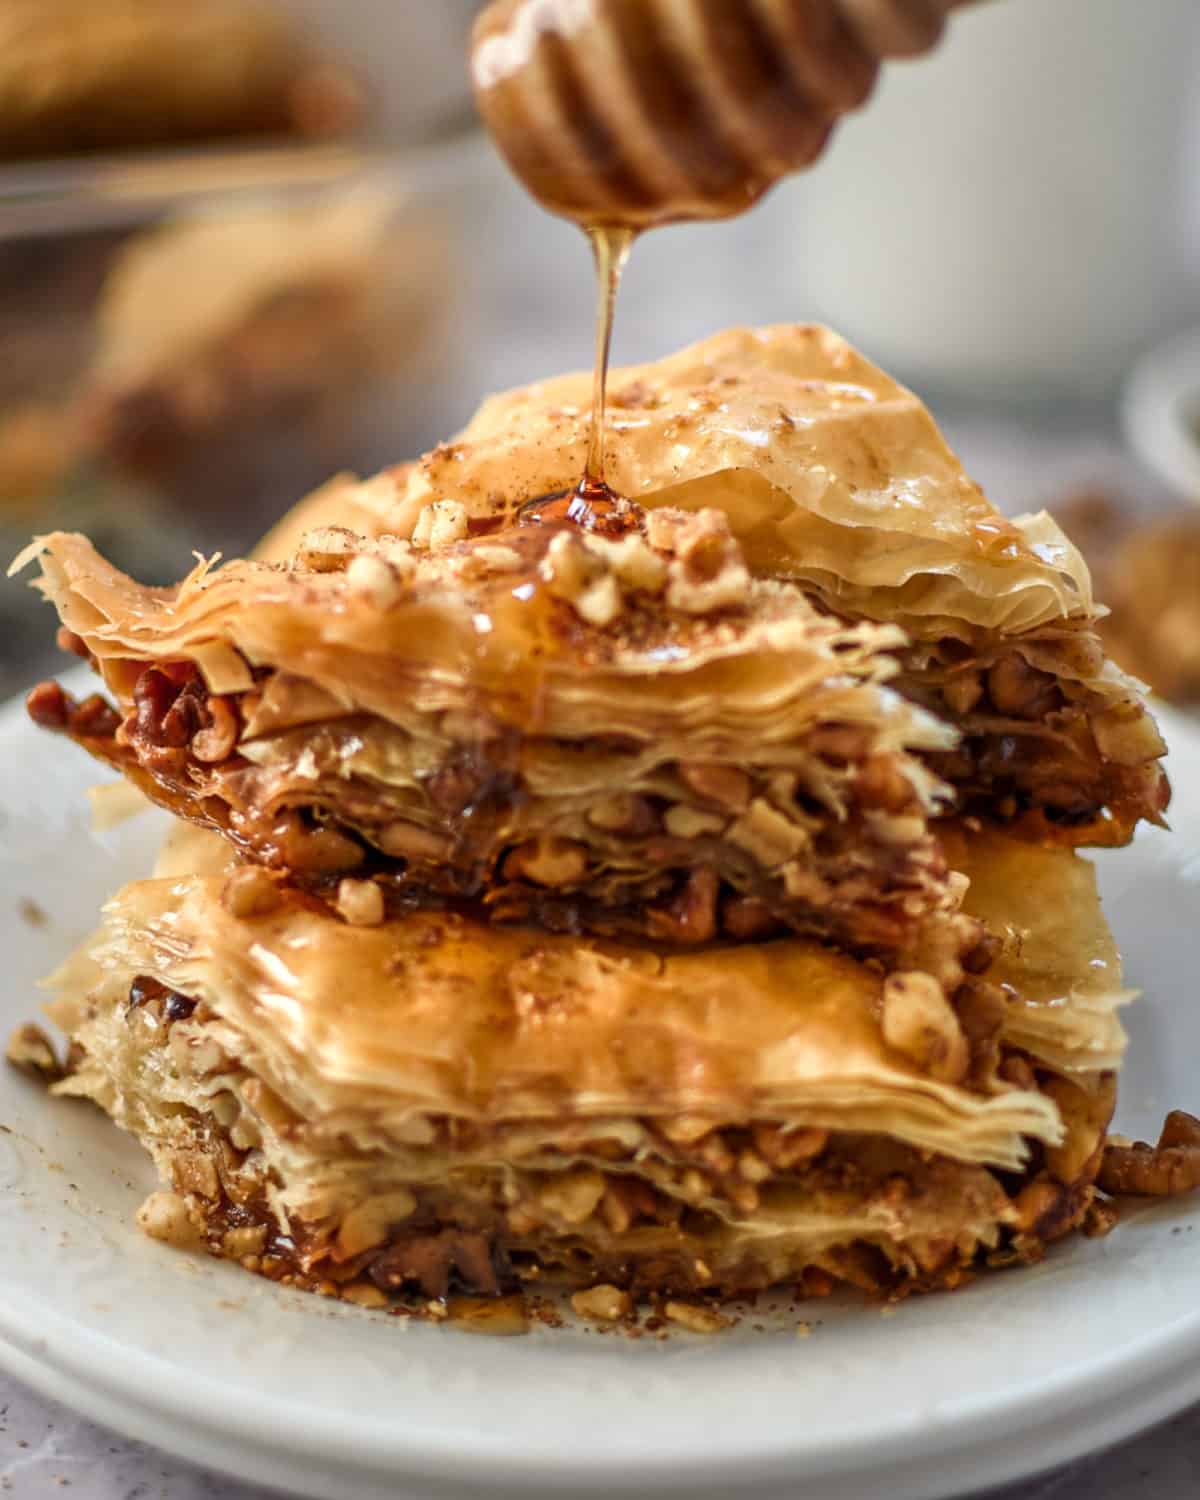 Pouring honey over two slices of baklava.